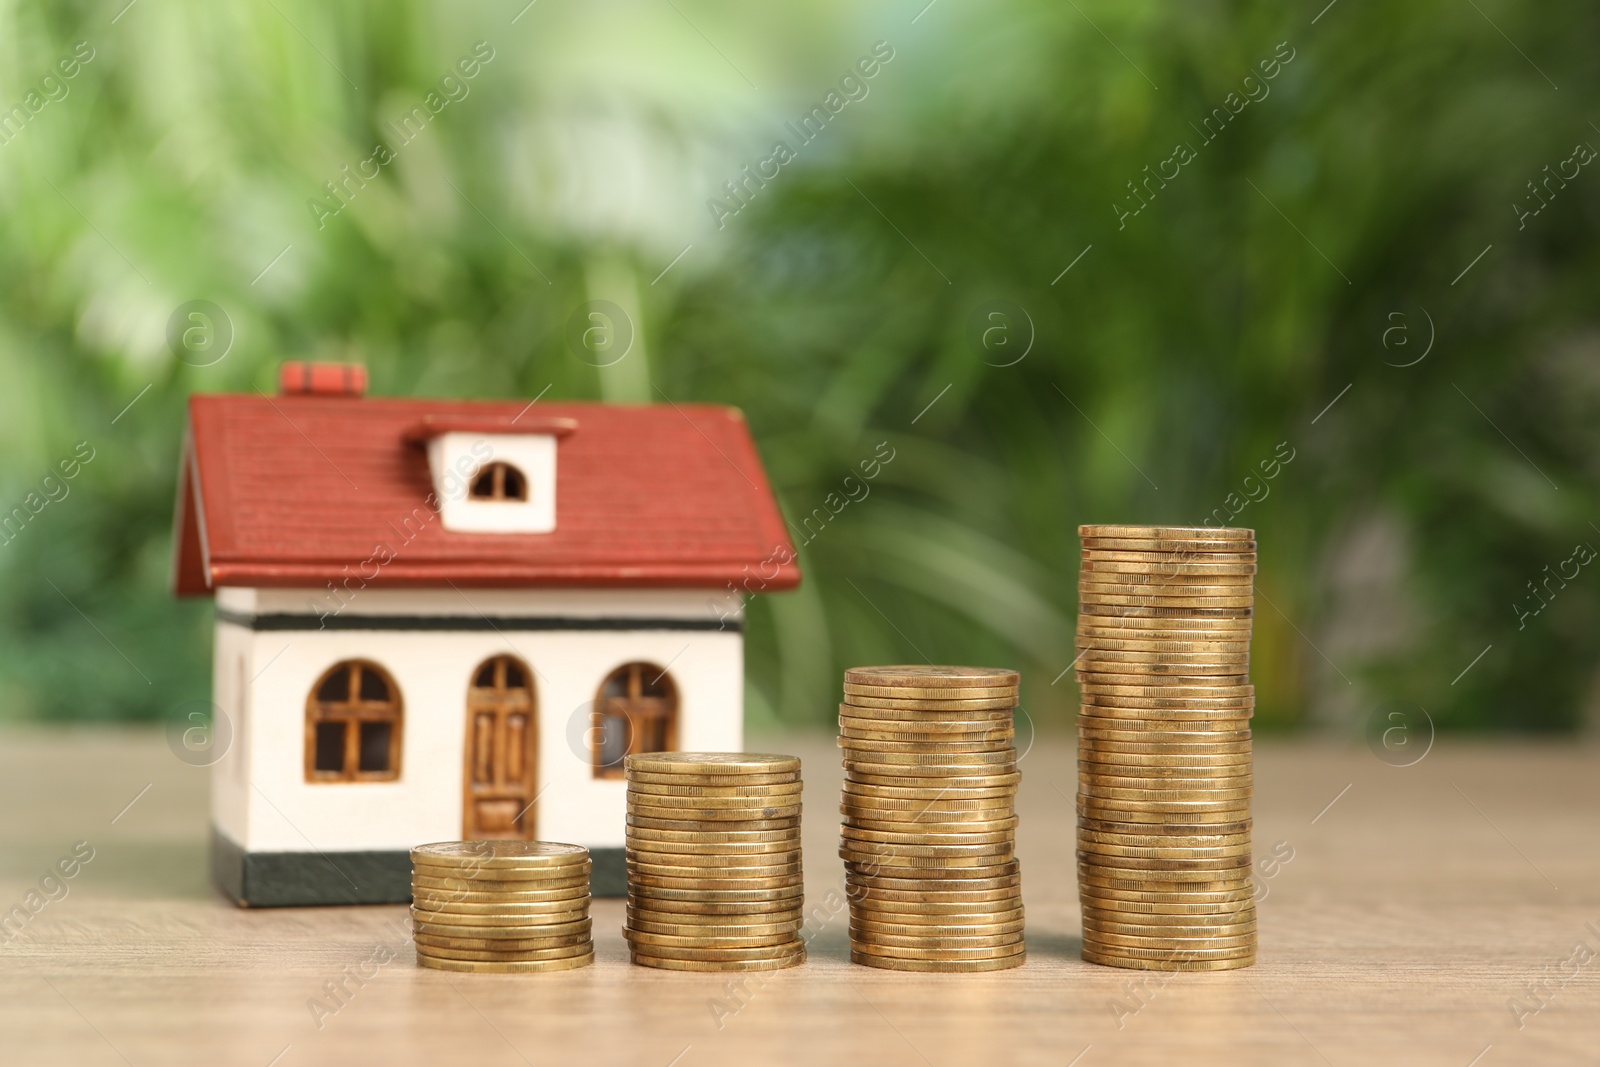 Photo of Mortgage concept. Model house and stacks of coins on wooden table against blurred green background